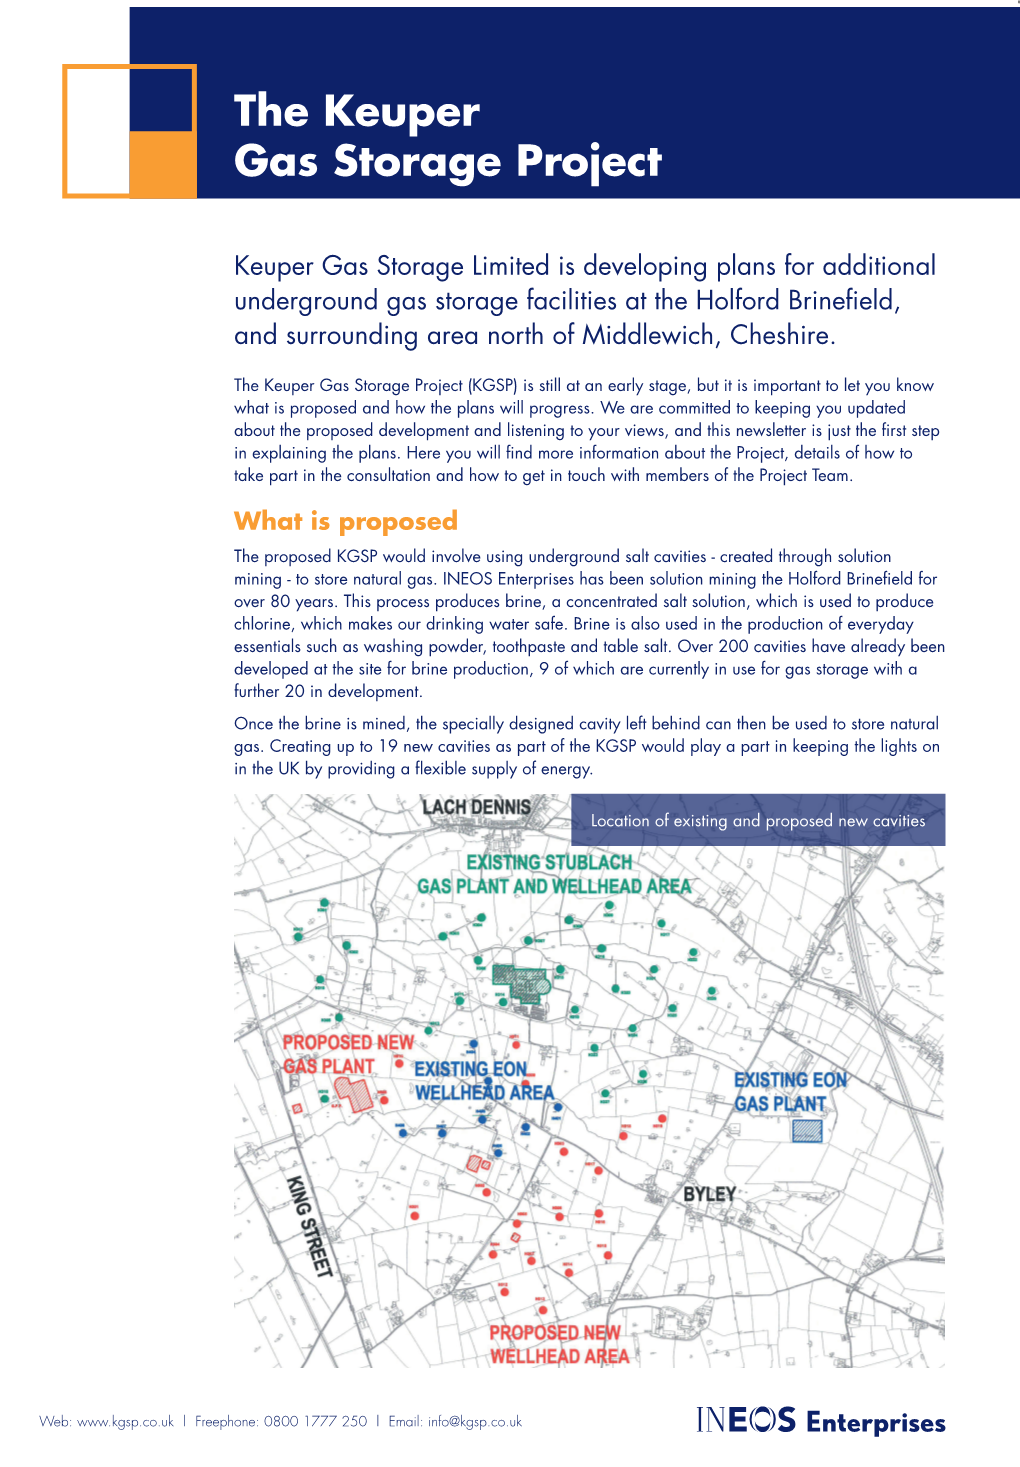 The Keuper Gas Storage Project